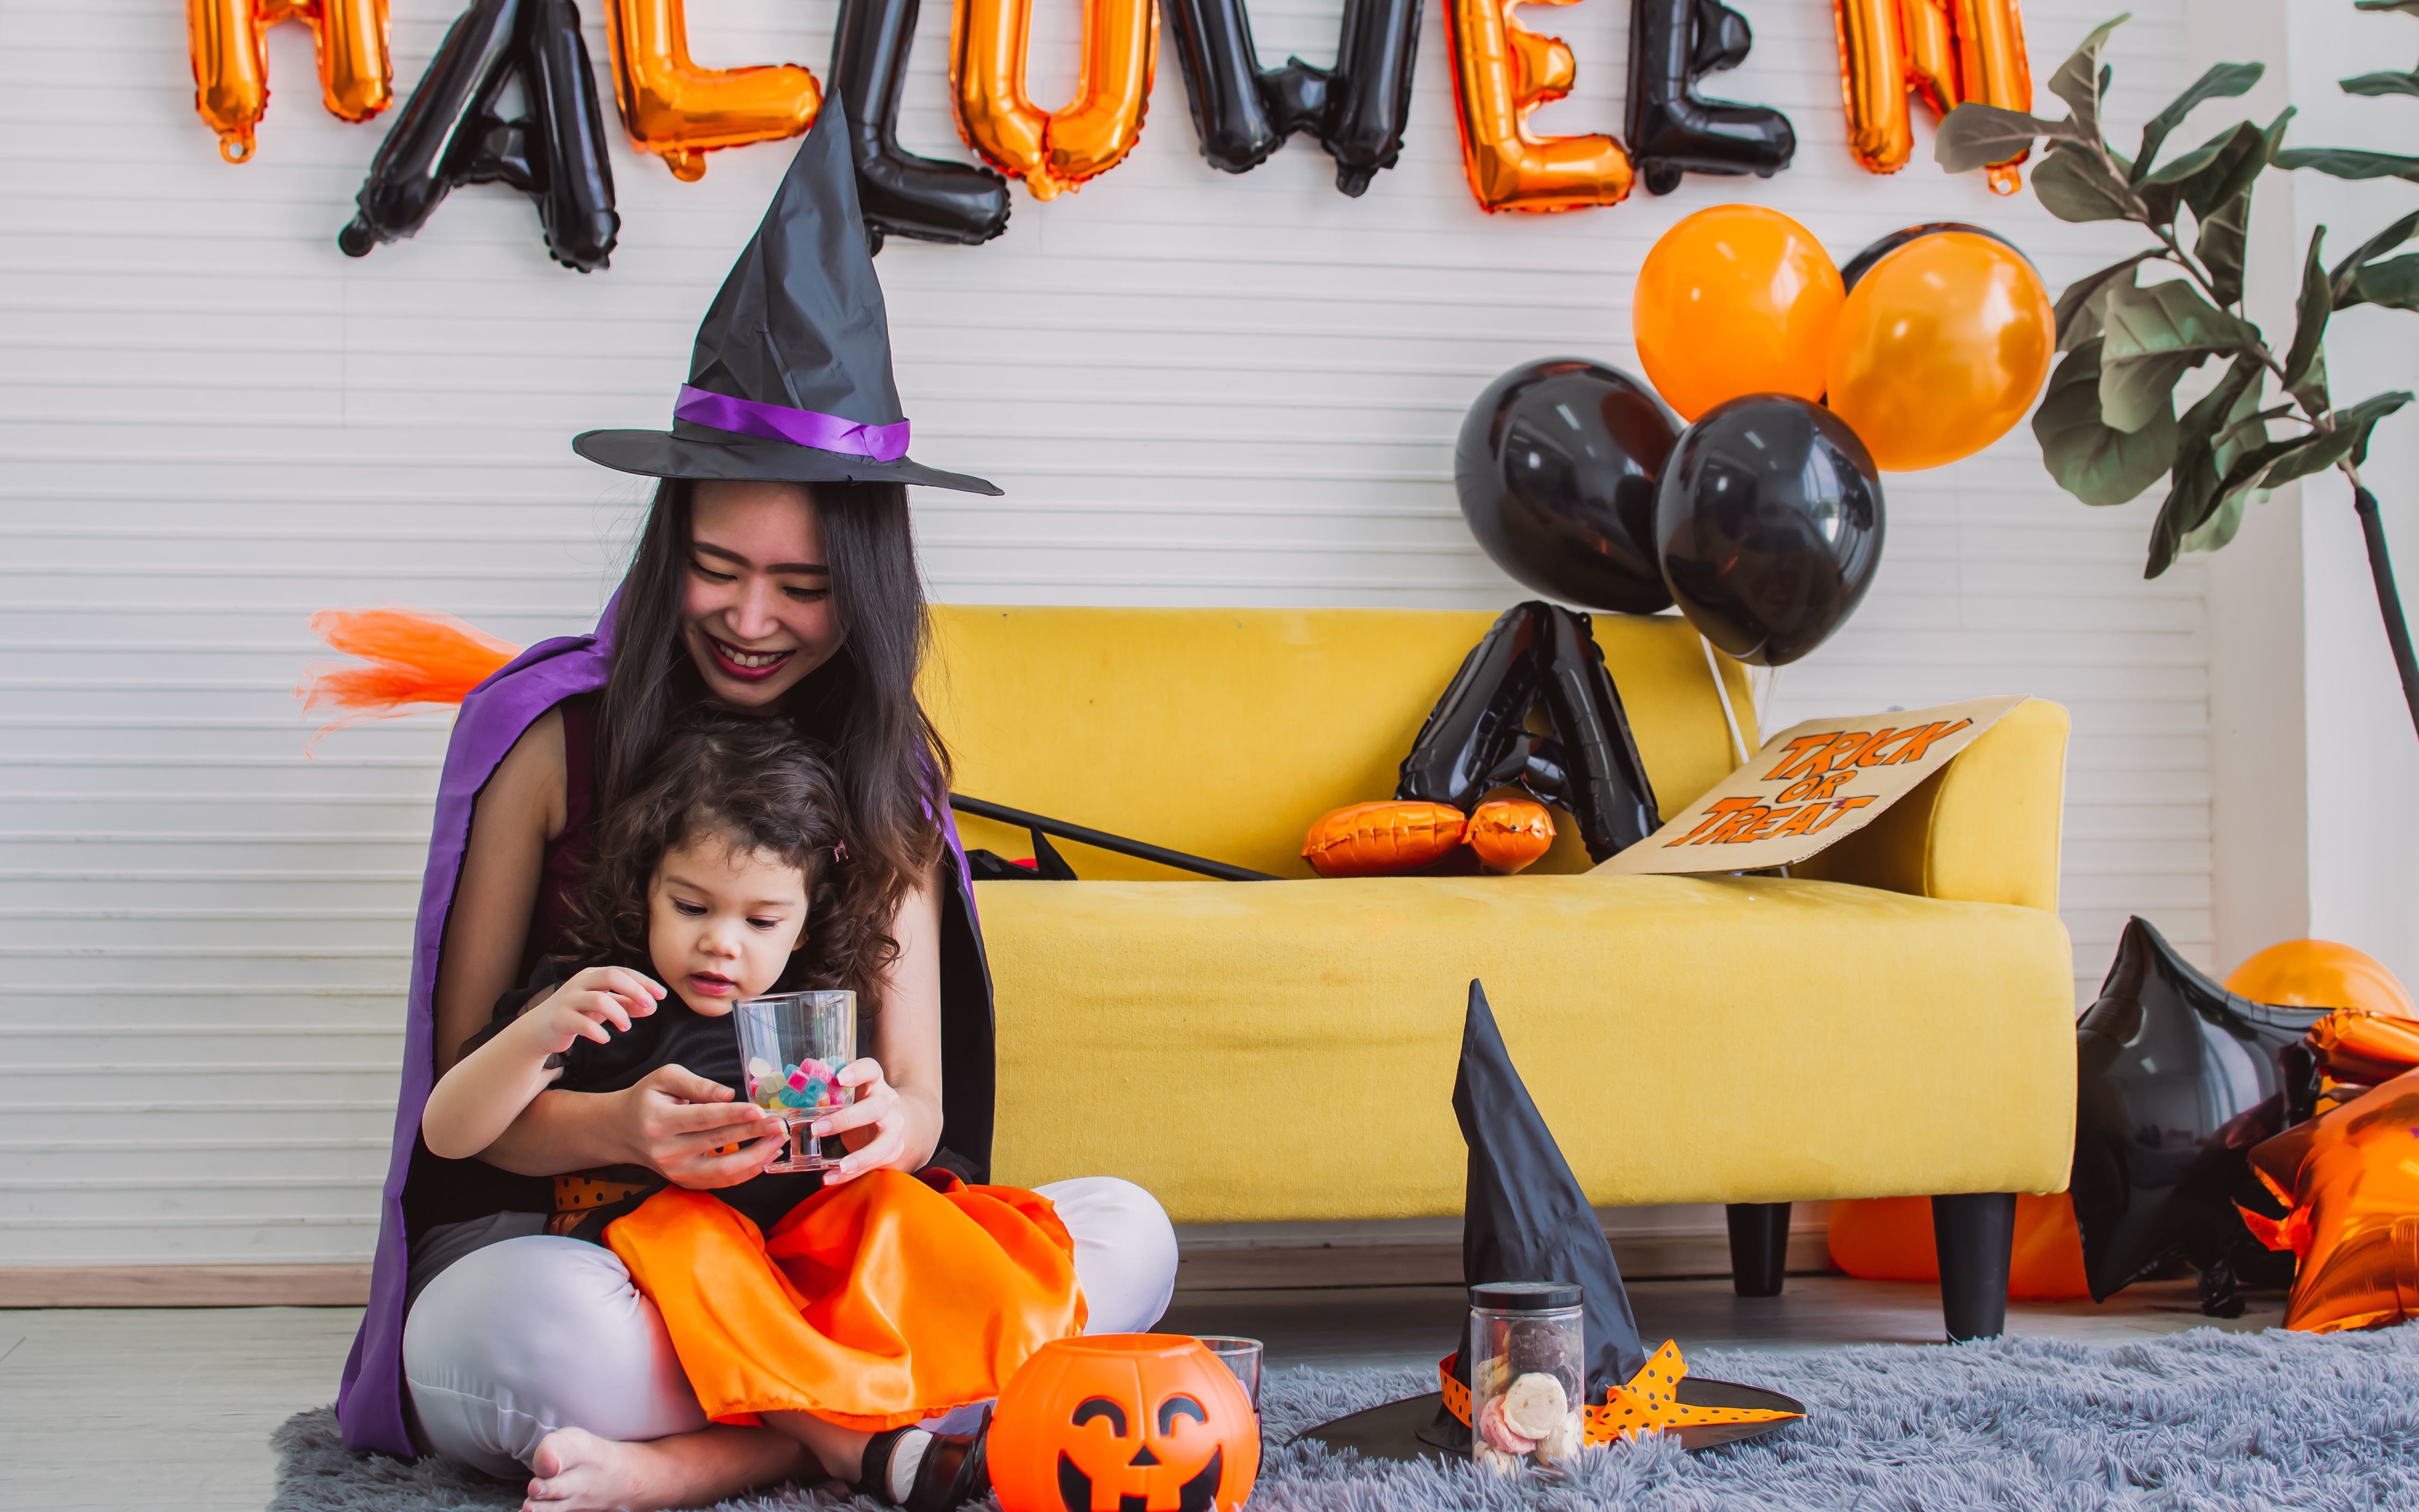 A young mom and her small daughter celebrate Halloween in cute costumes